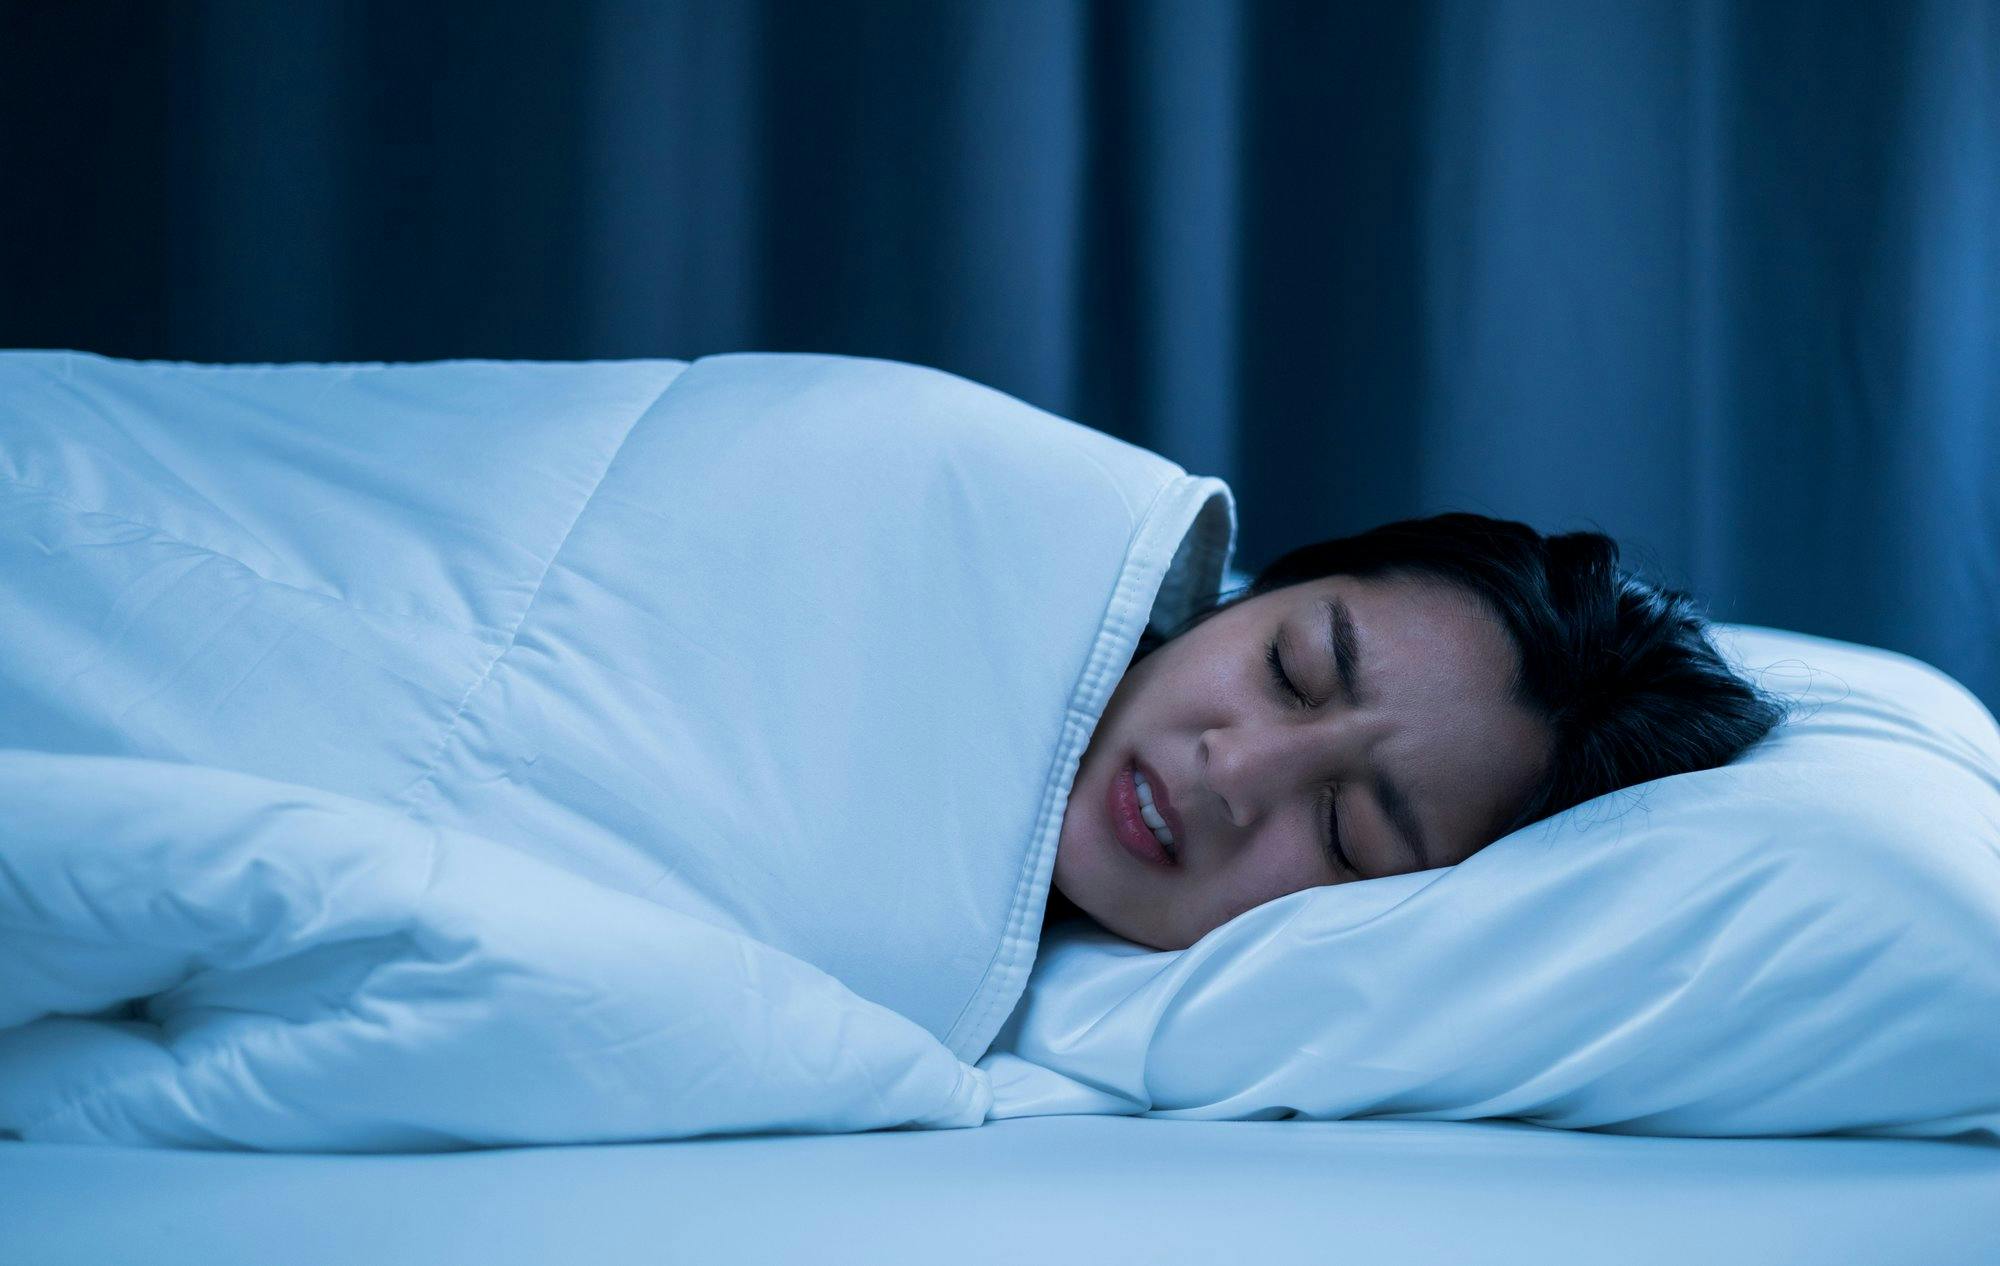 How Long Does It Take to Fall Asleep Normally?